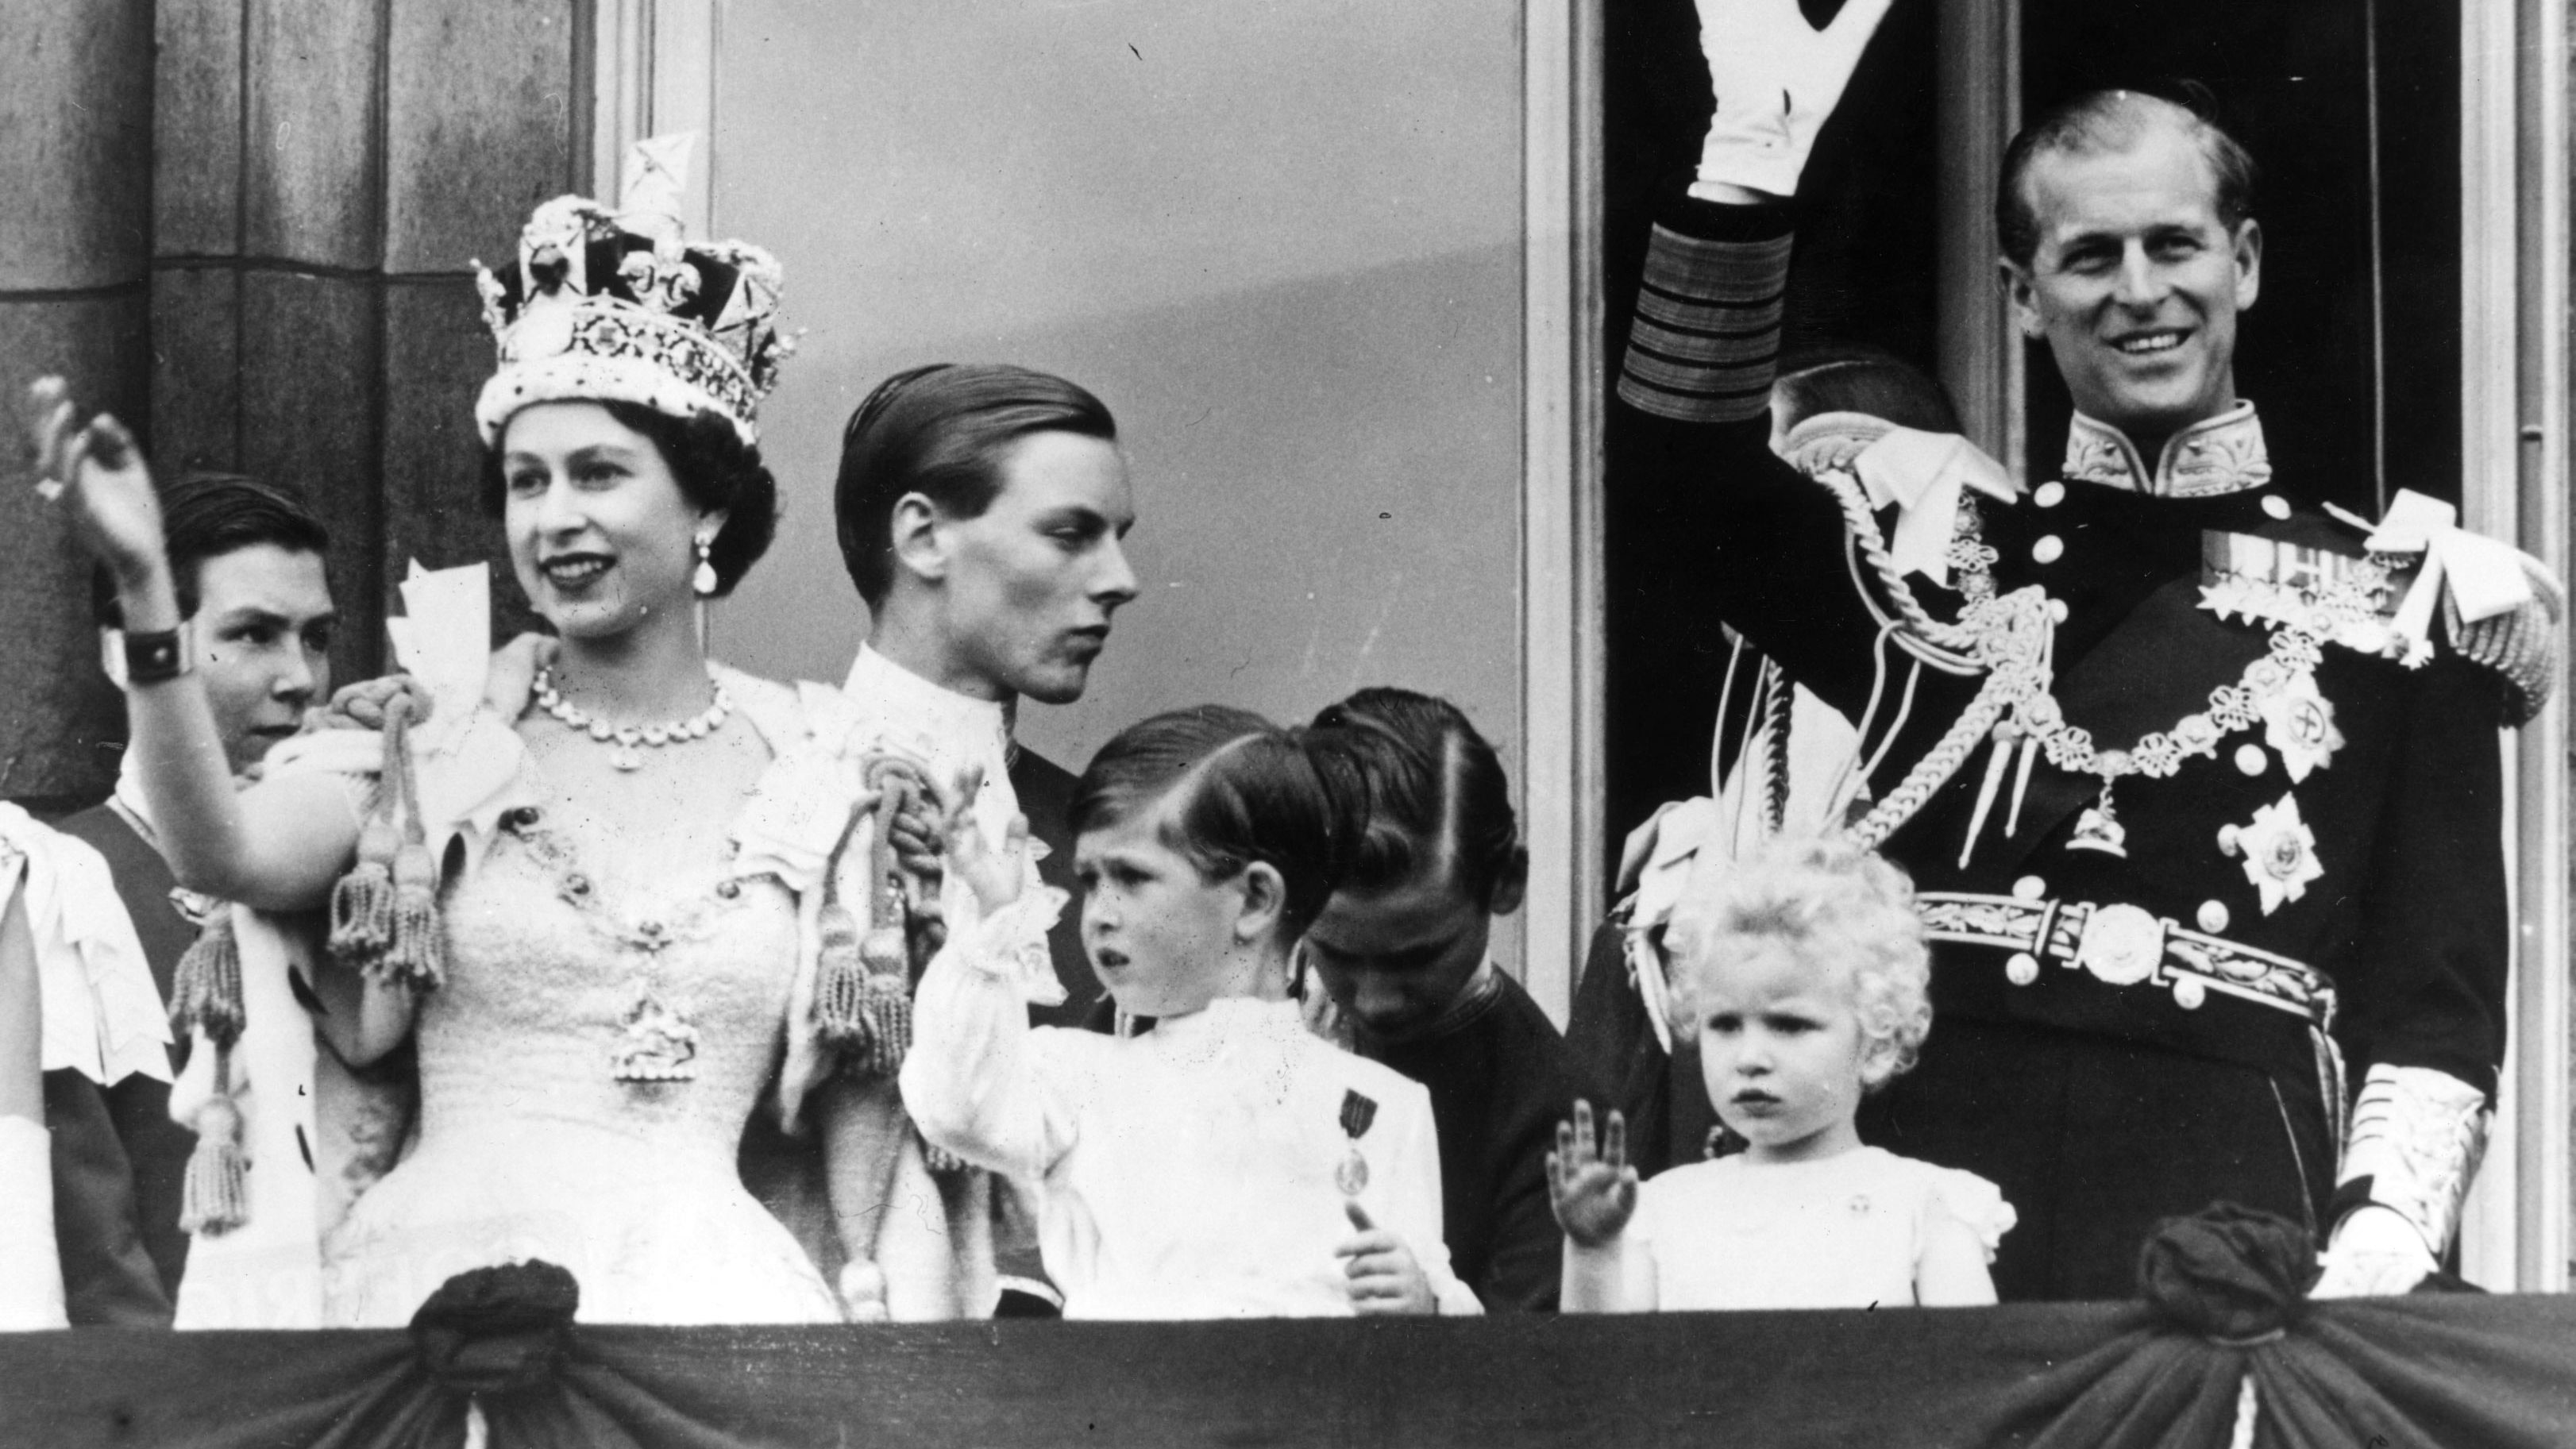 what are the key historical events that have shaped the royal families involved in this marriage